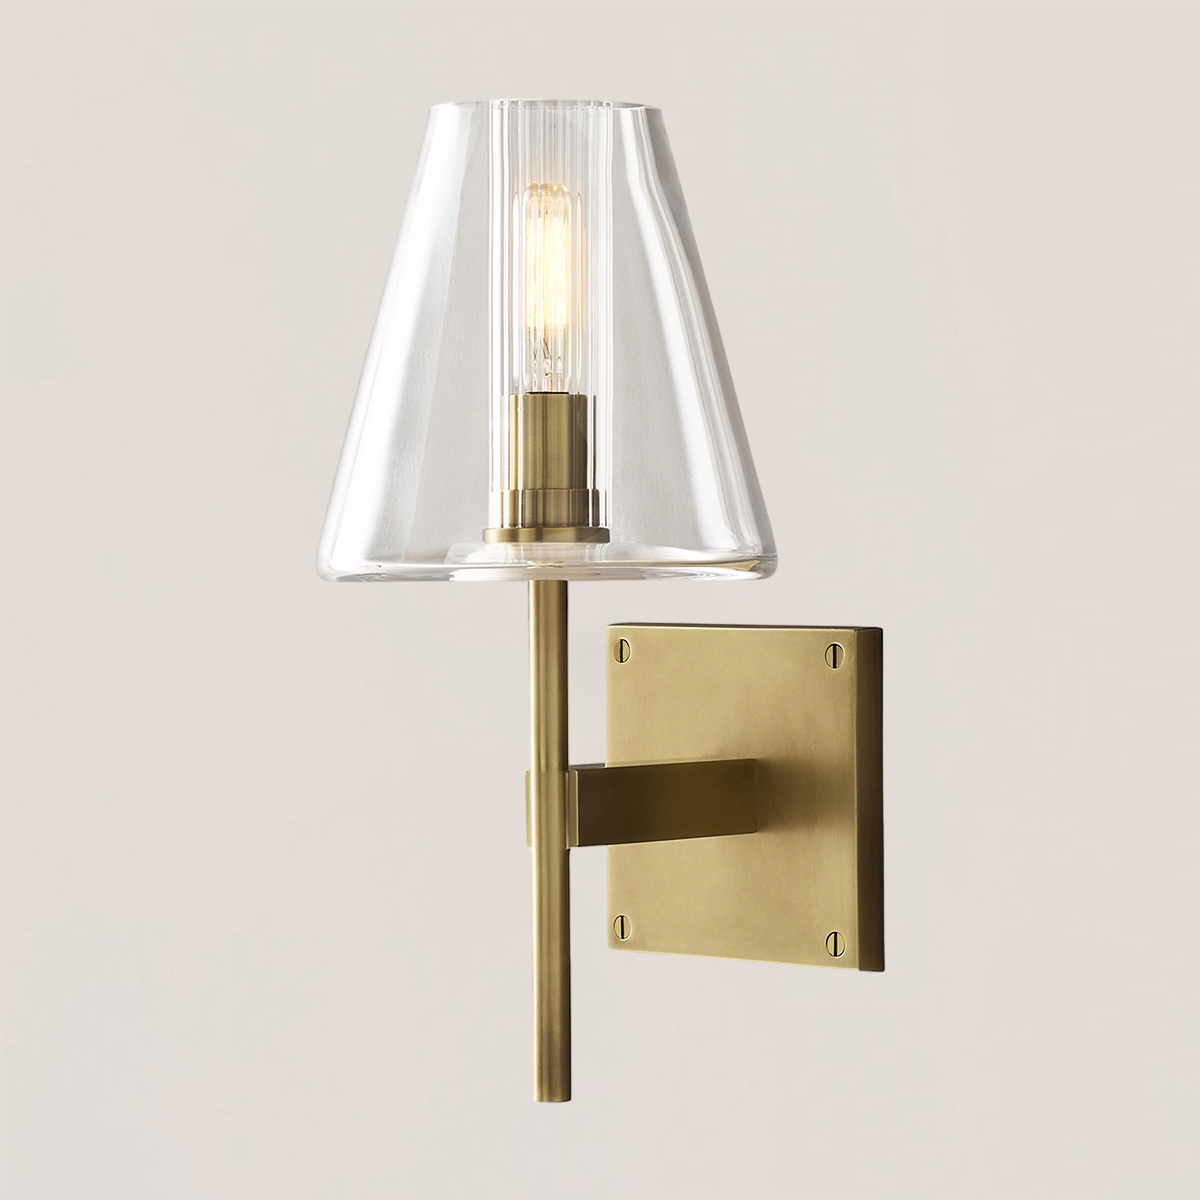 VASELAMPS - Glass Shade Sconce